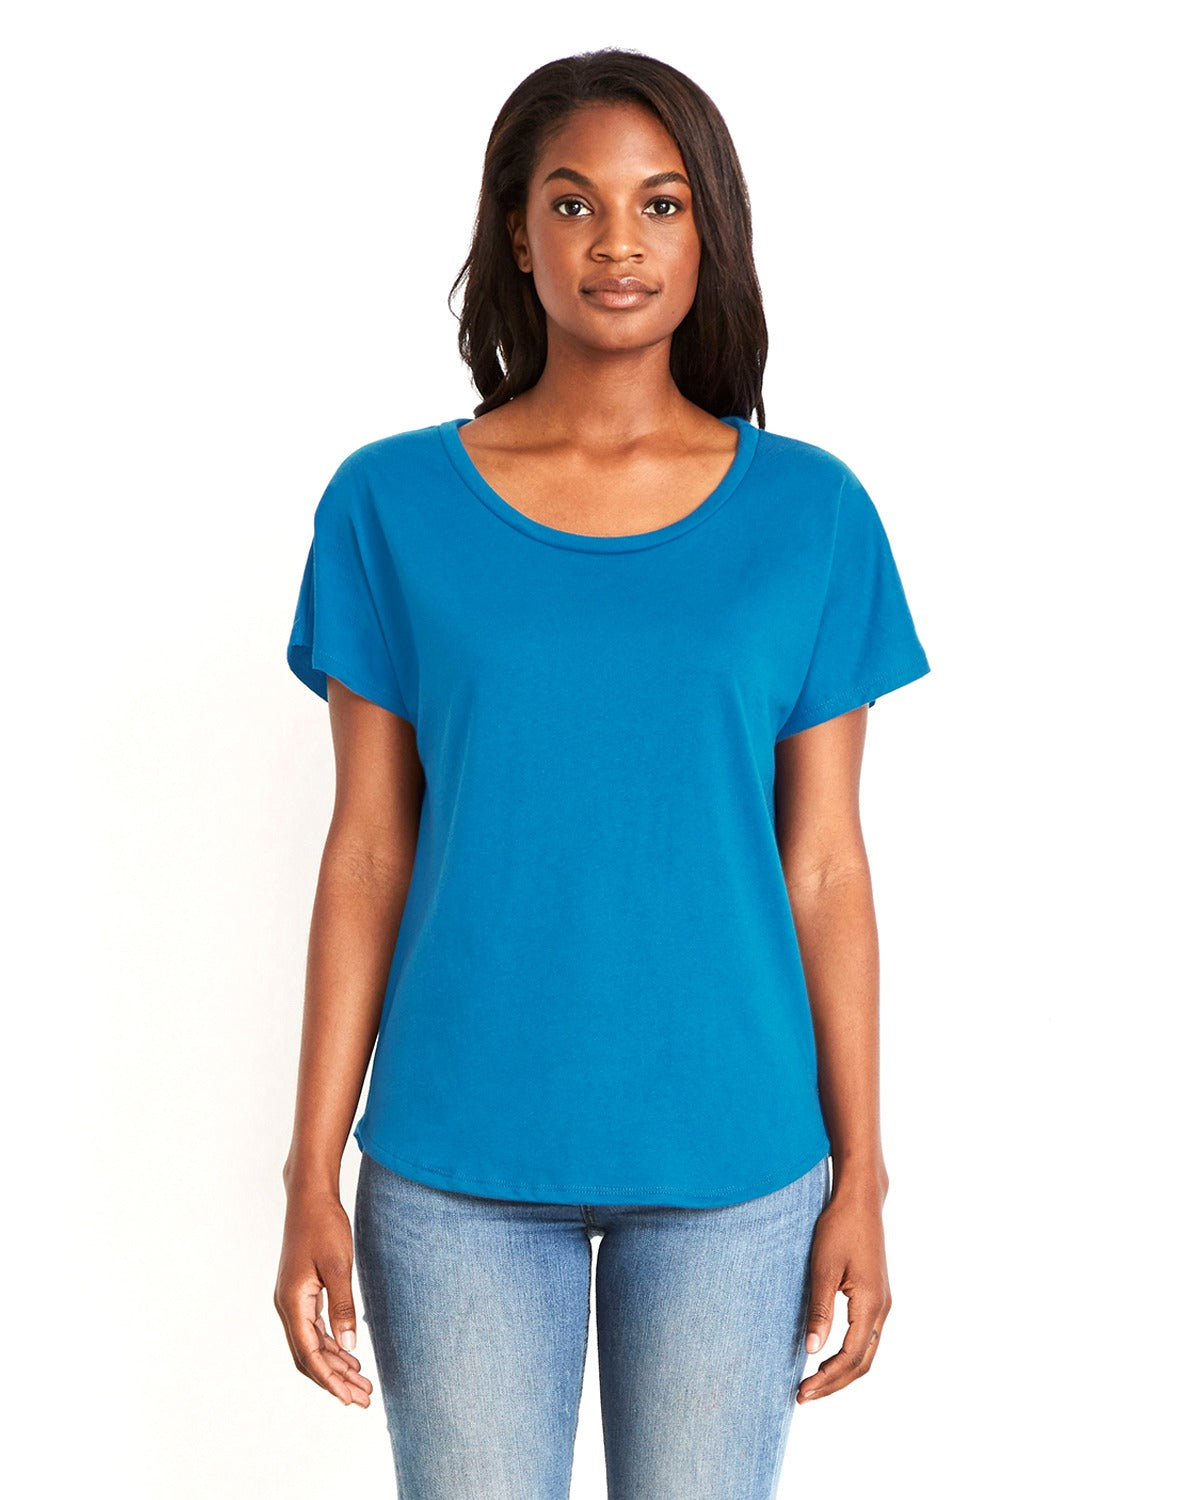 The Way of the Leaf Ladies' Dolman Relaxed Fit T-Shirt 1560